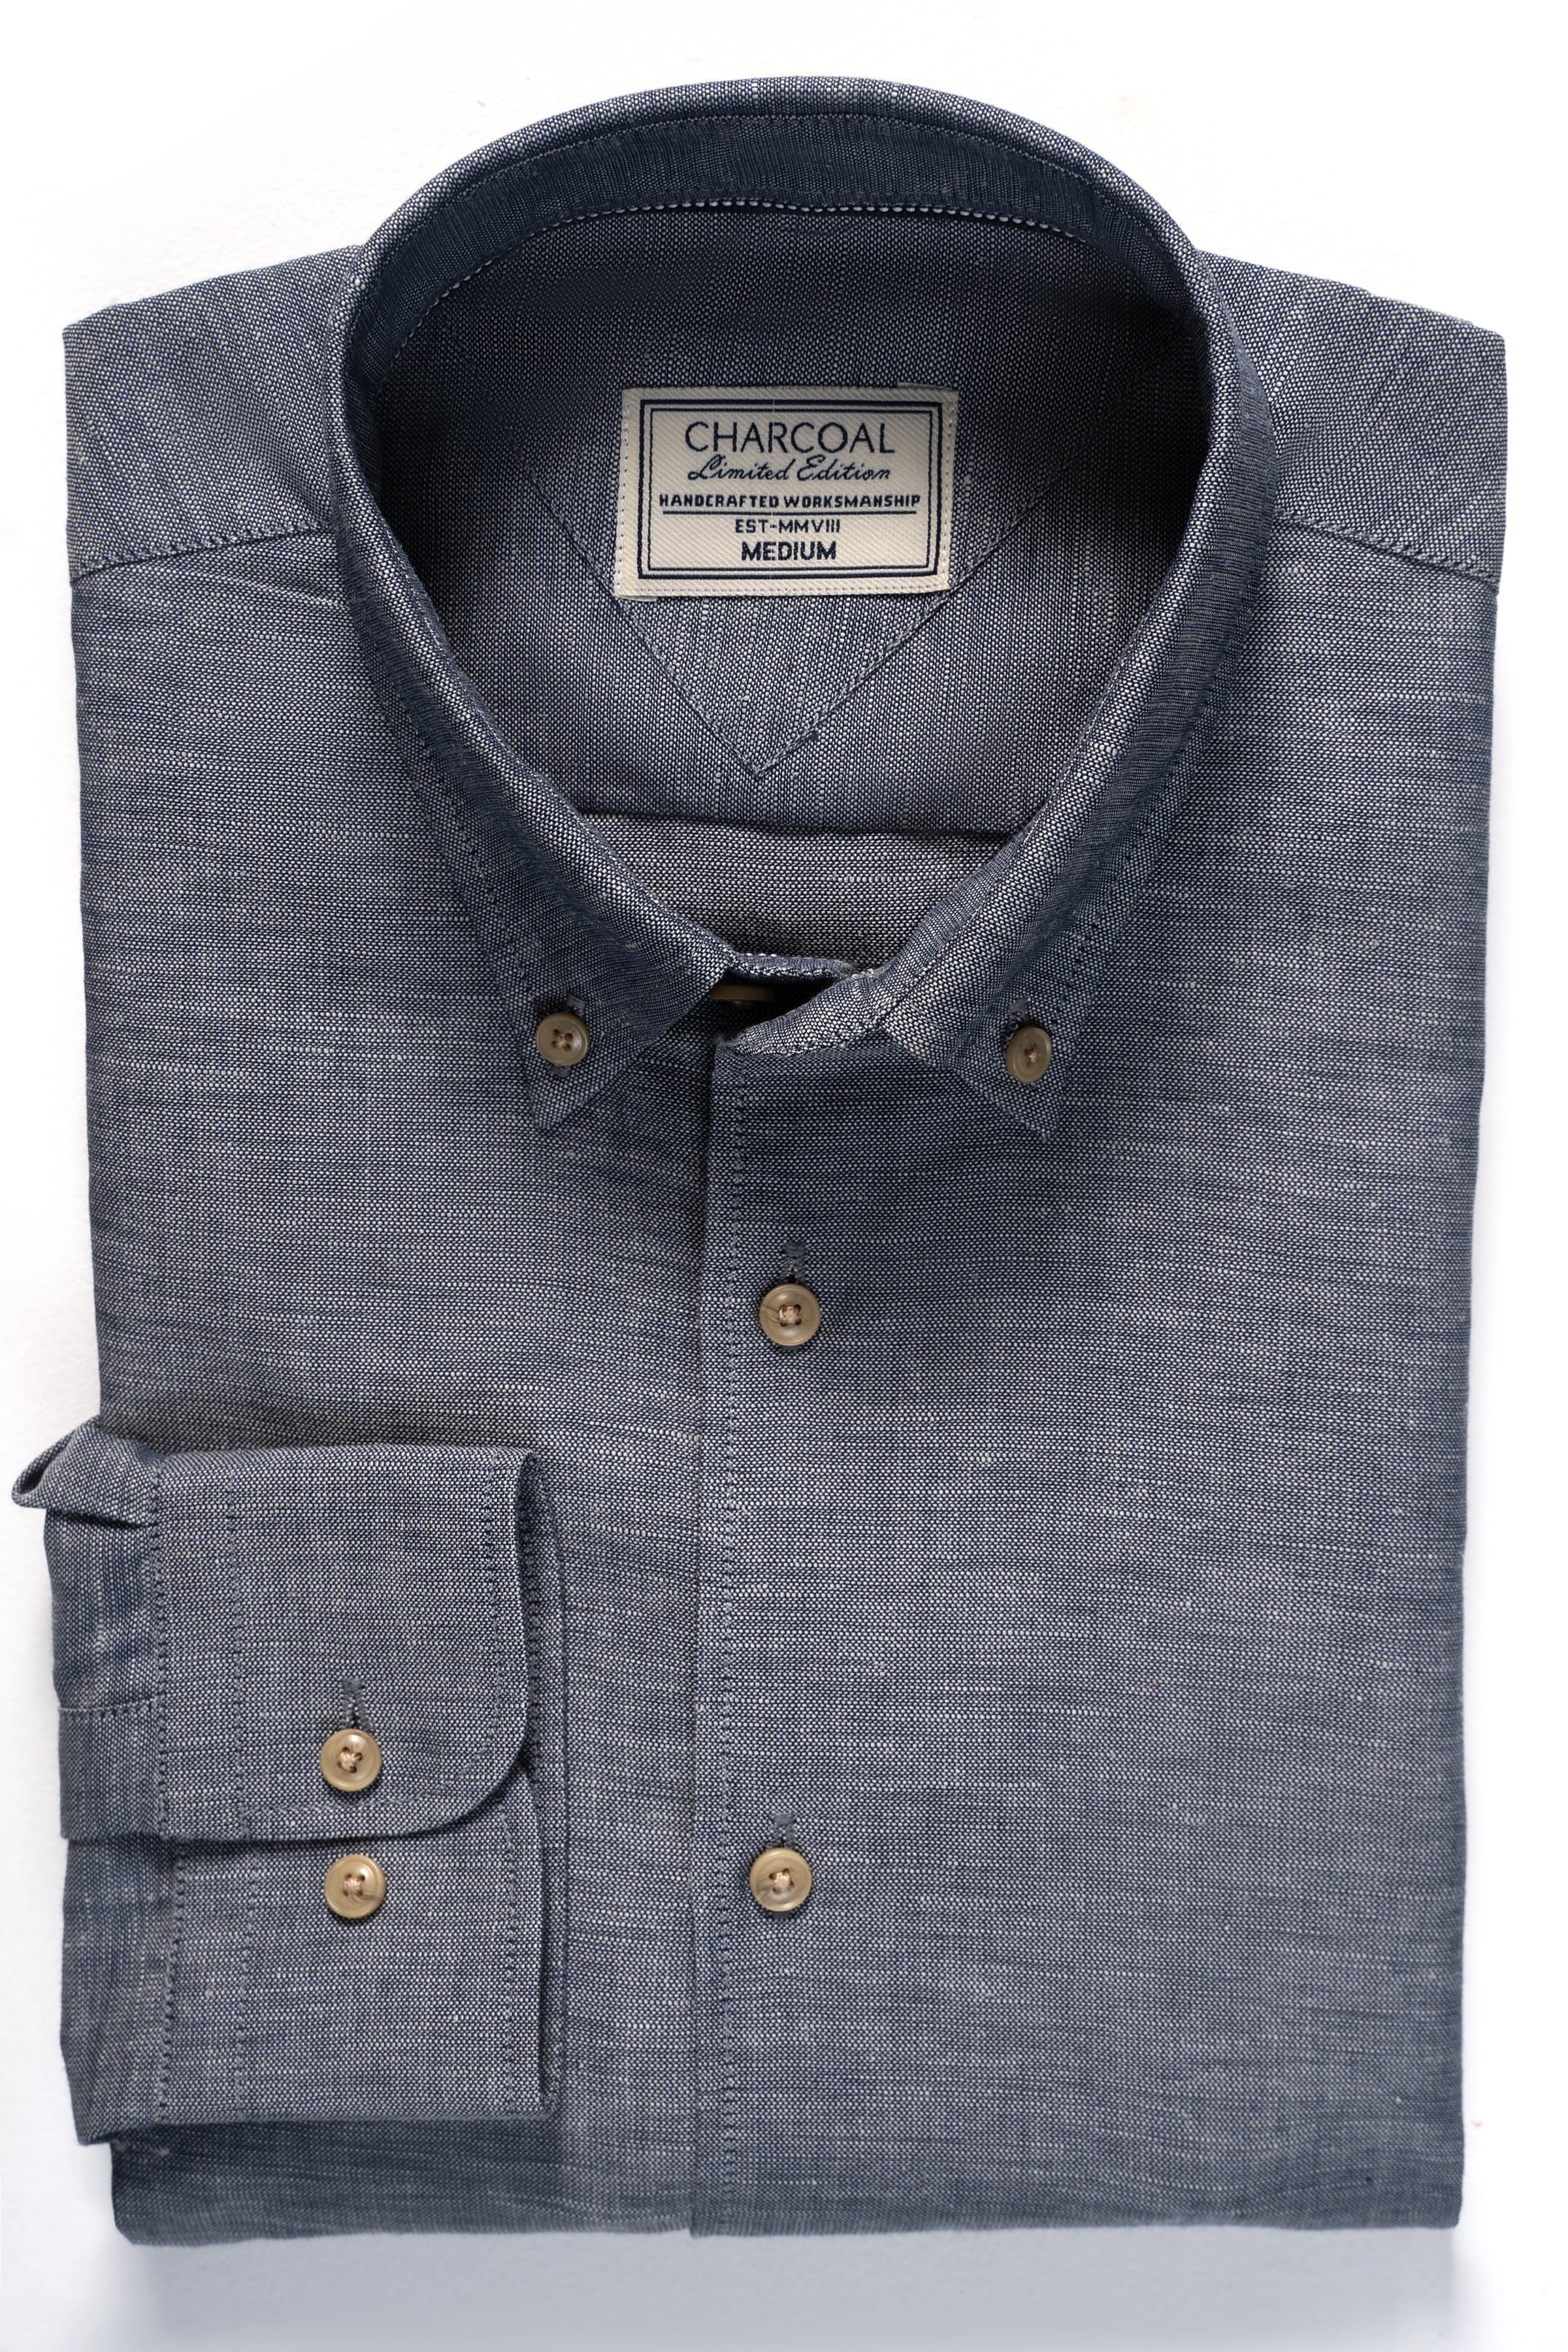 LIMITED EDITION LINEN FABRIC SHIRT CHARCOAL GREY